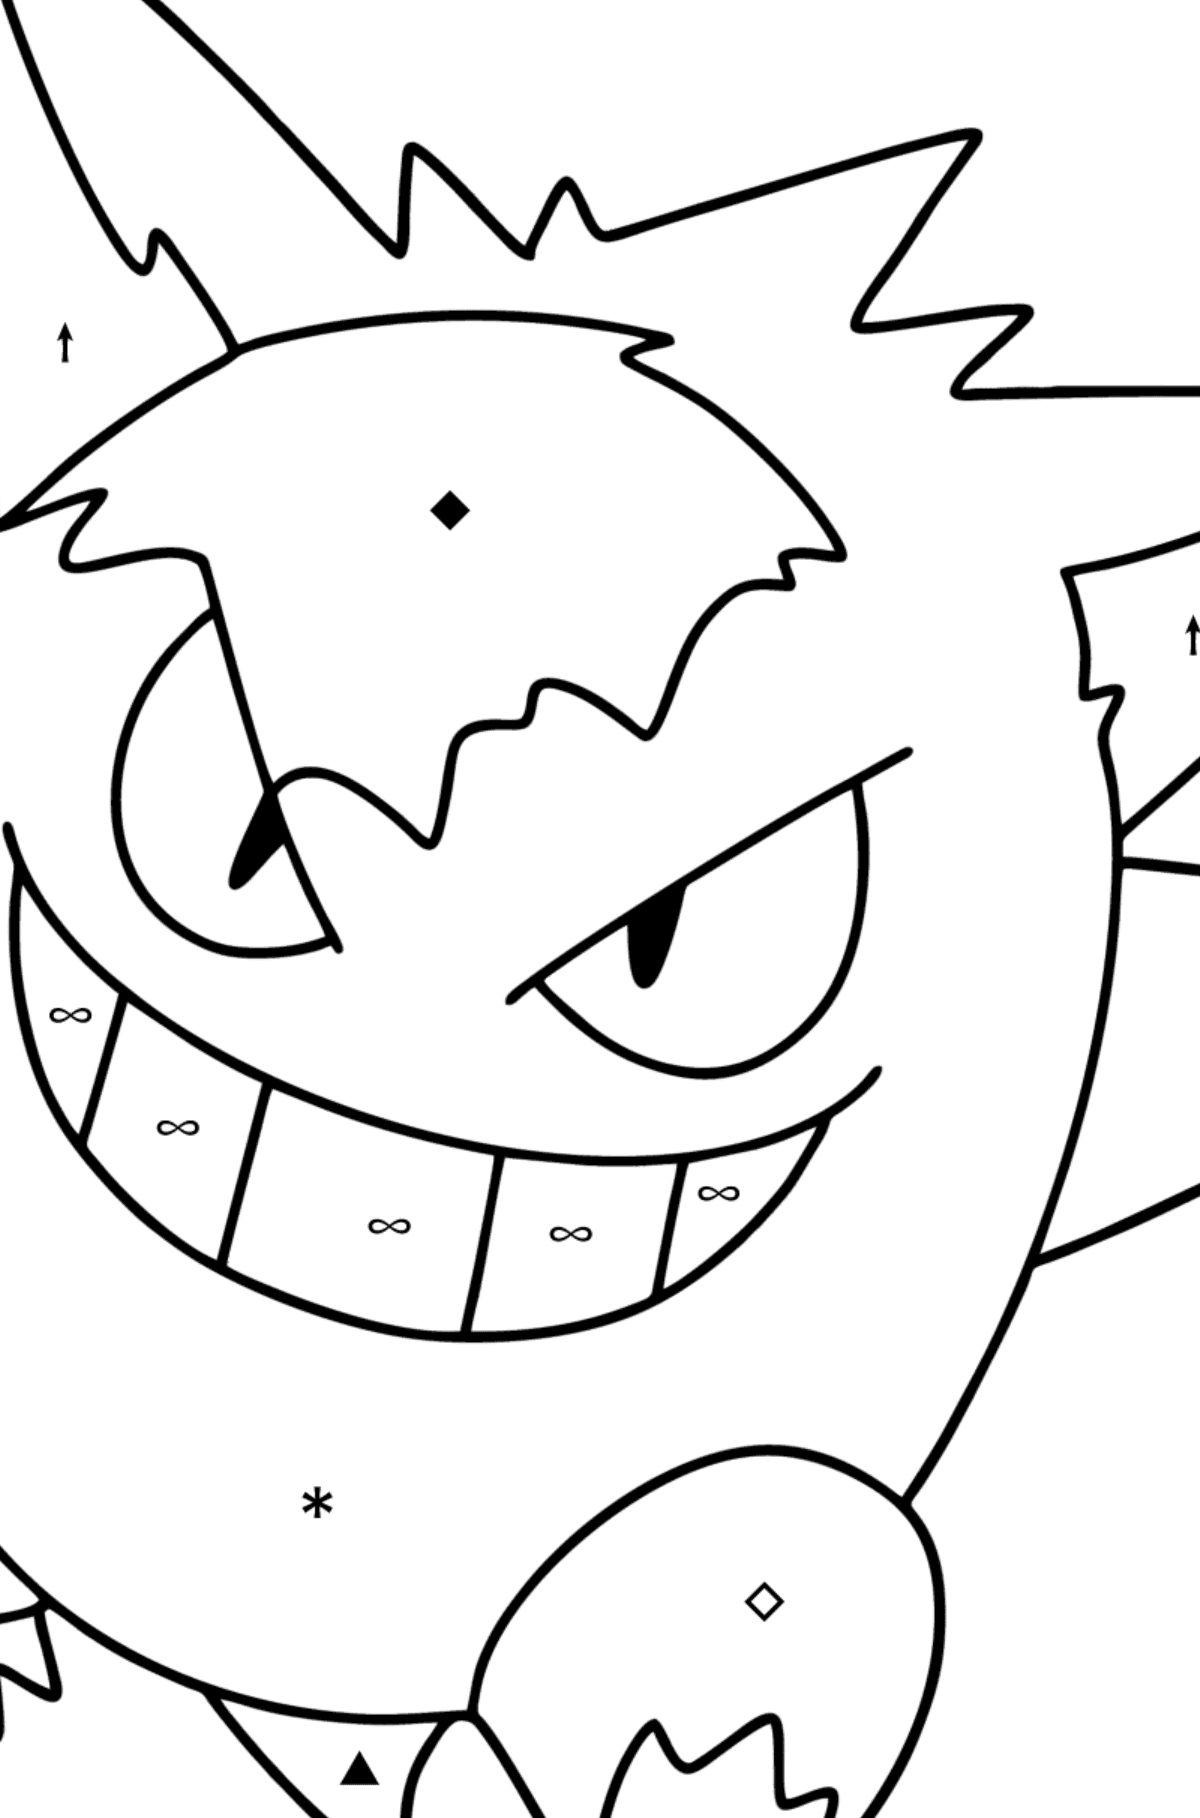 Pokémon Go Gengar coloring page - Coloring by Symbols for Kids